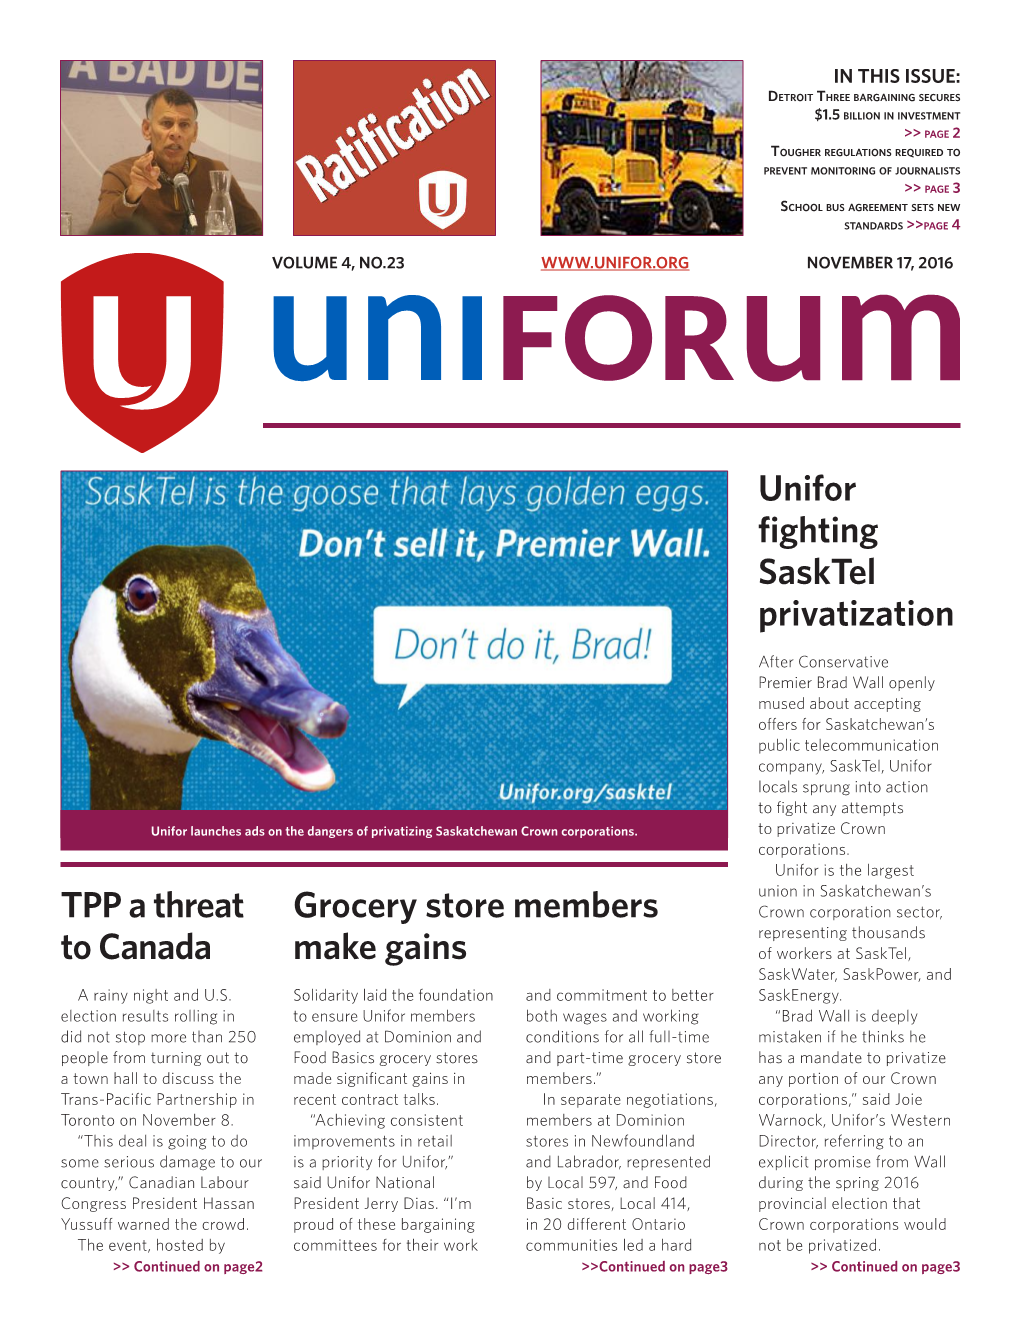 Unifor Fighting Sasktel Privatization TPP a Threat to Canada Grocery